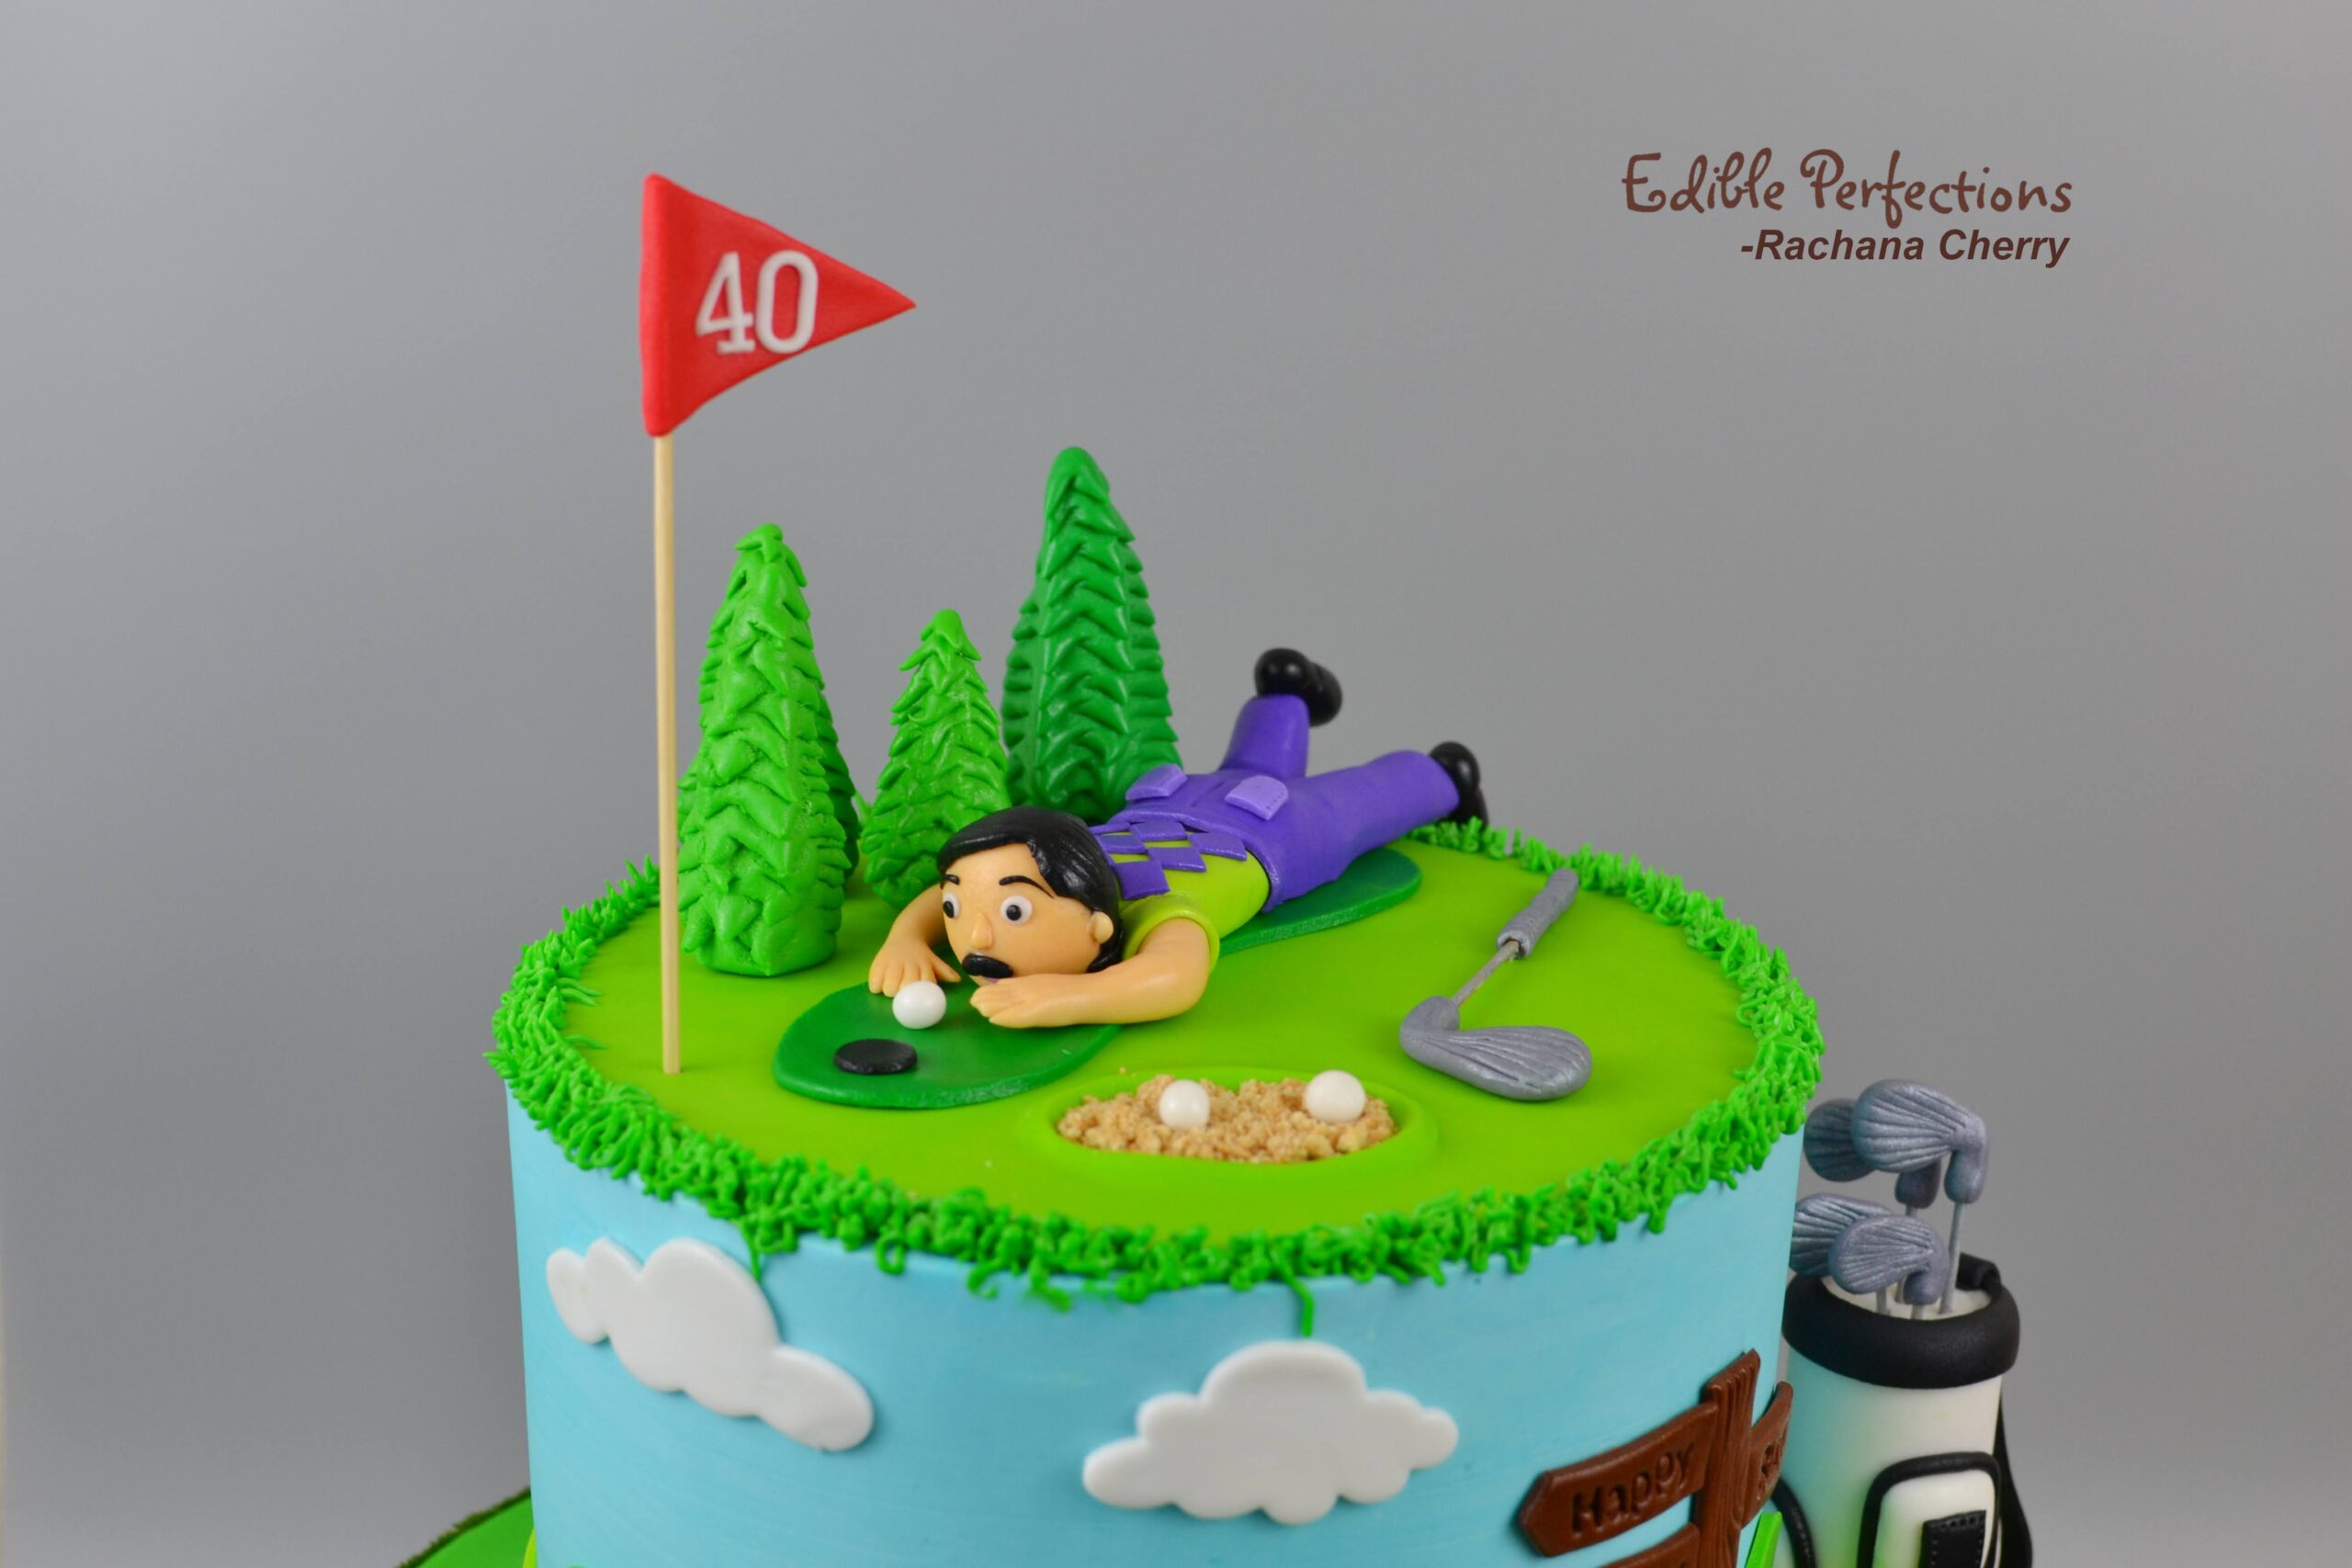 Golf Themed Cake Topper - Edible Perfections